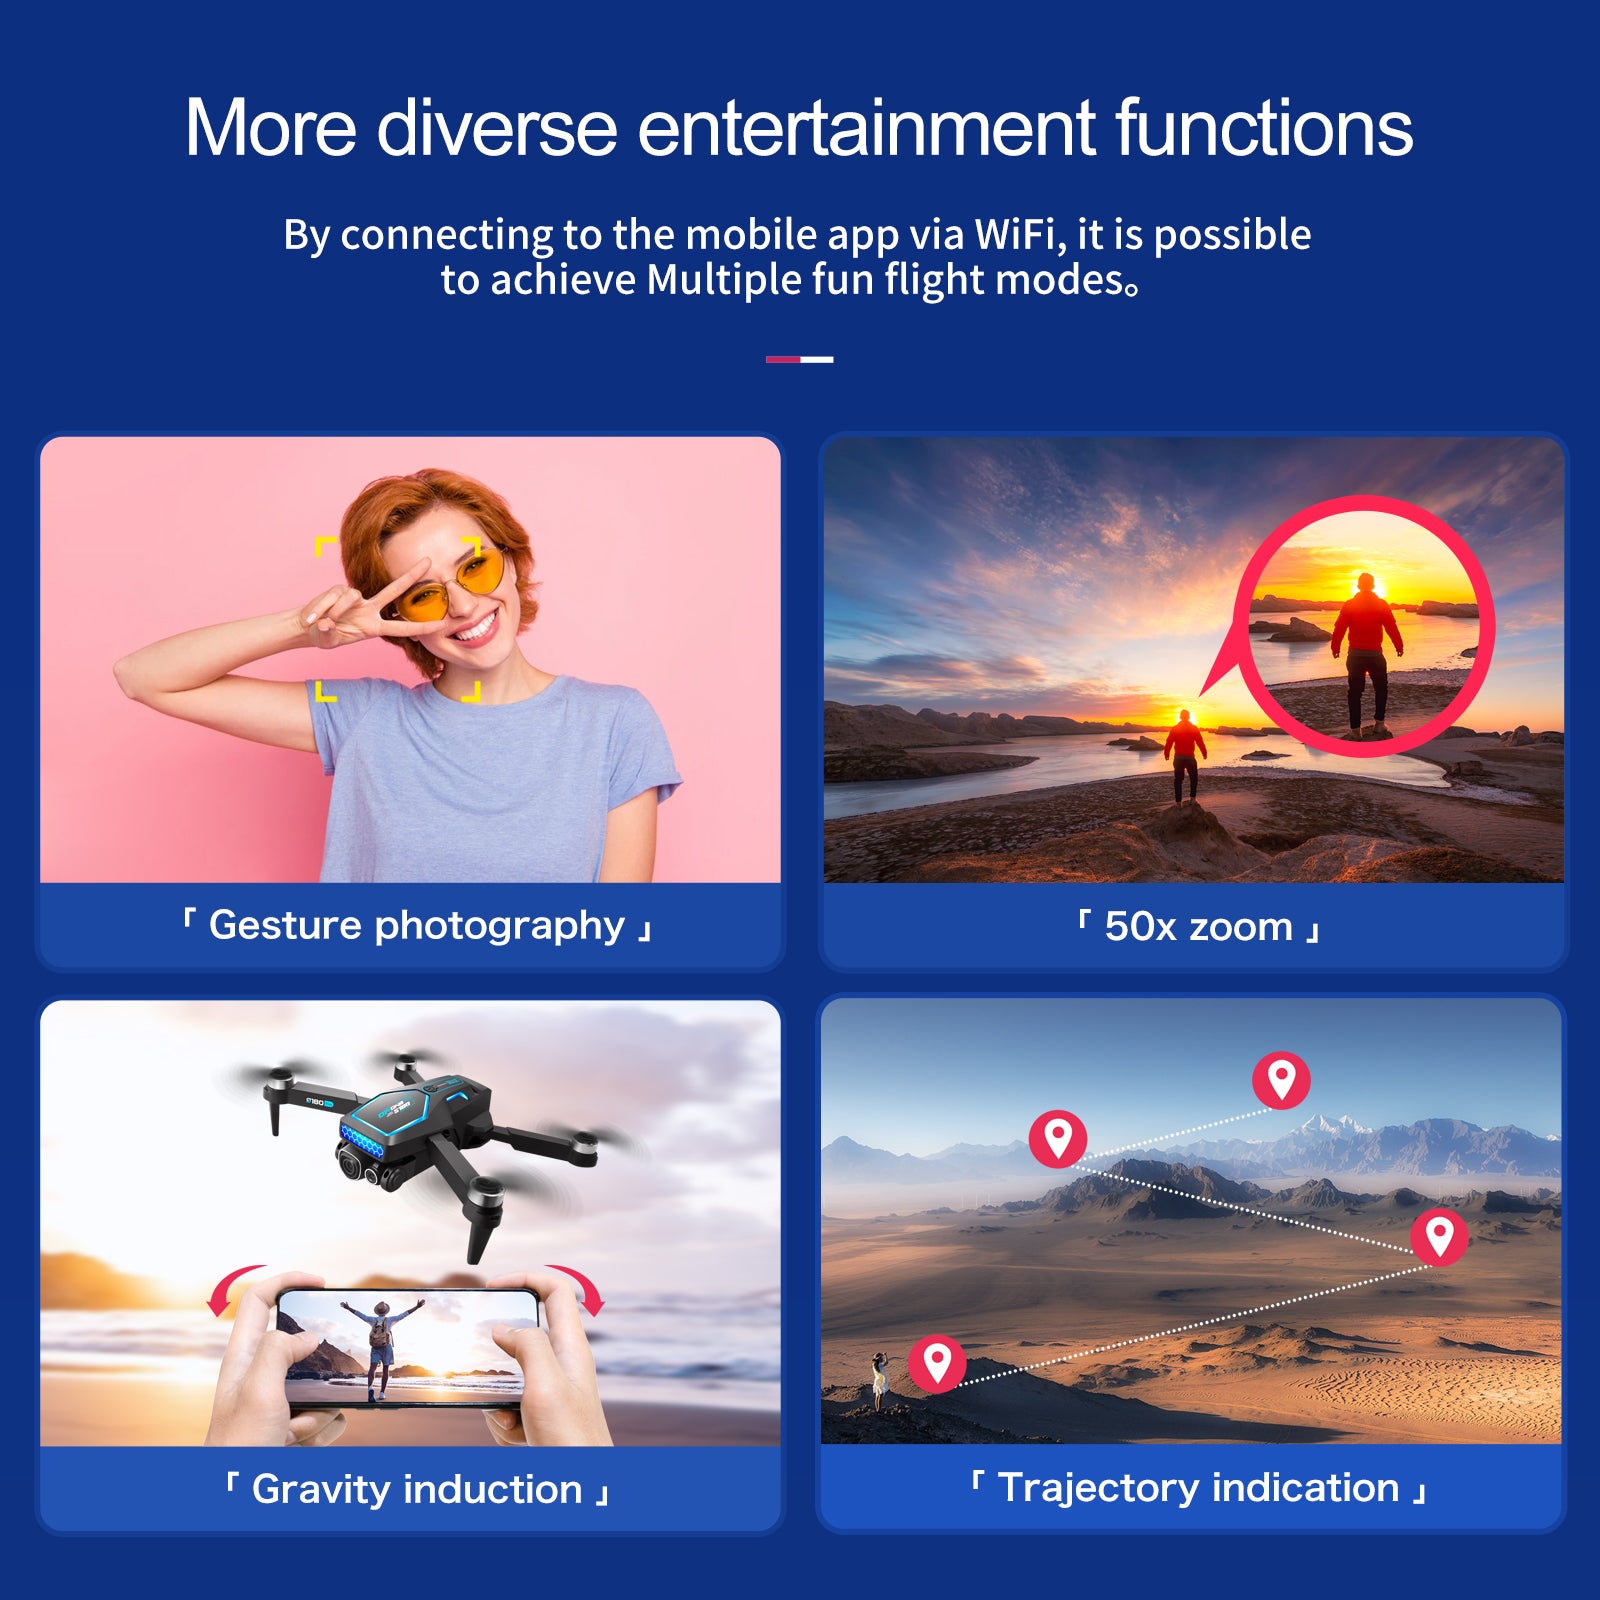 S180 Drone, Control your drone with WiFi, featuring multiple modes, zoom, and gestures.